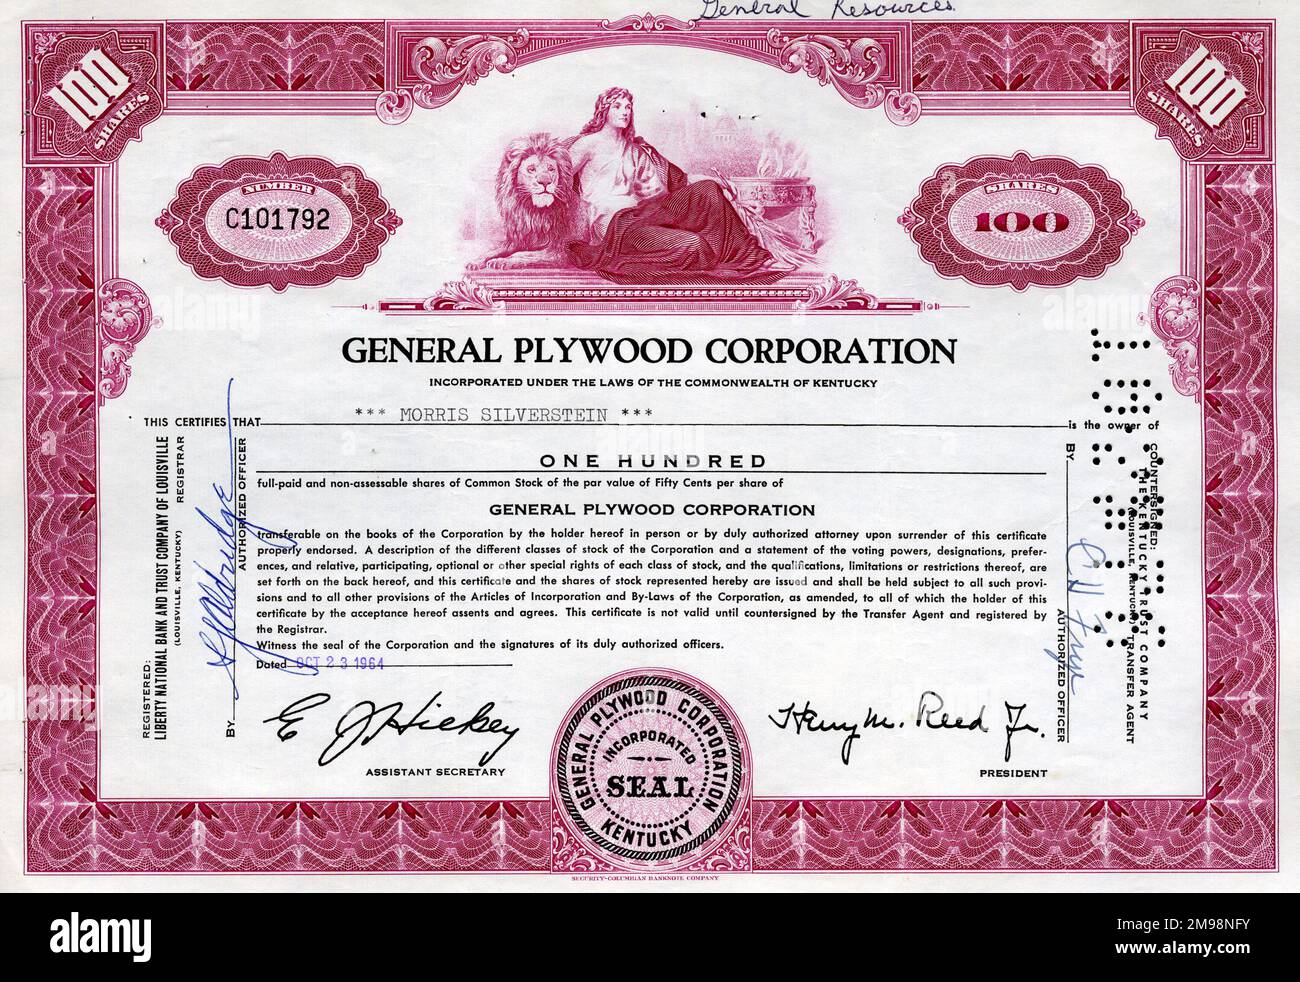 Stock Share Certificate - General Plywood Corporation, 100 shares. Stock Photo